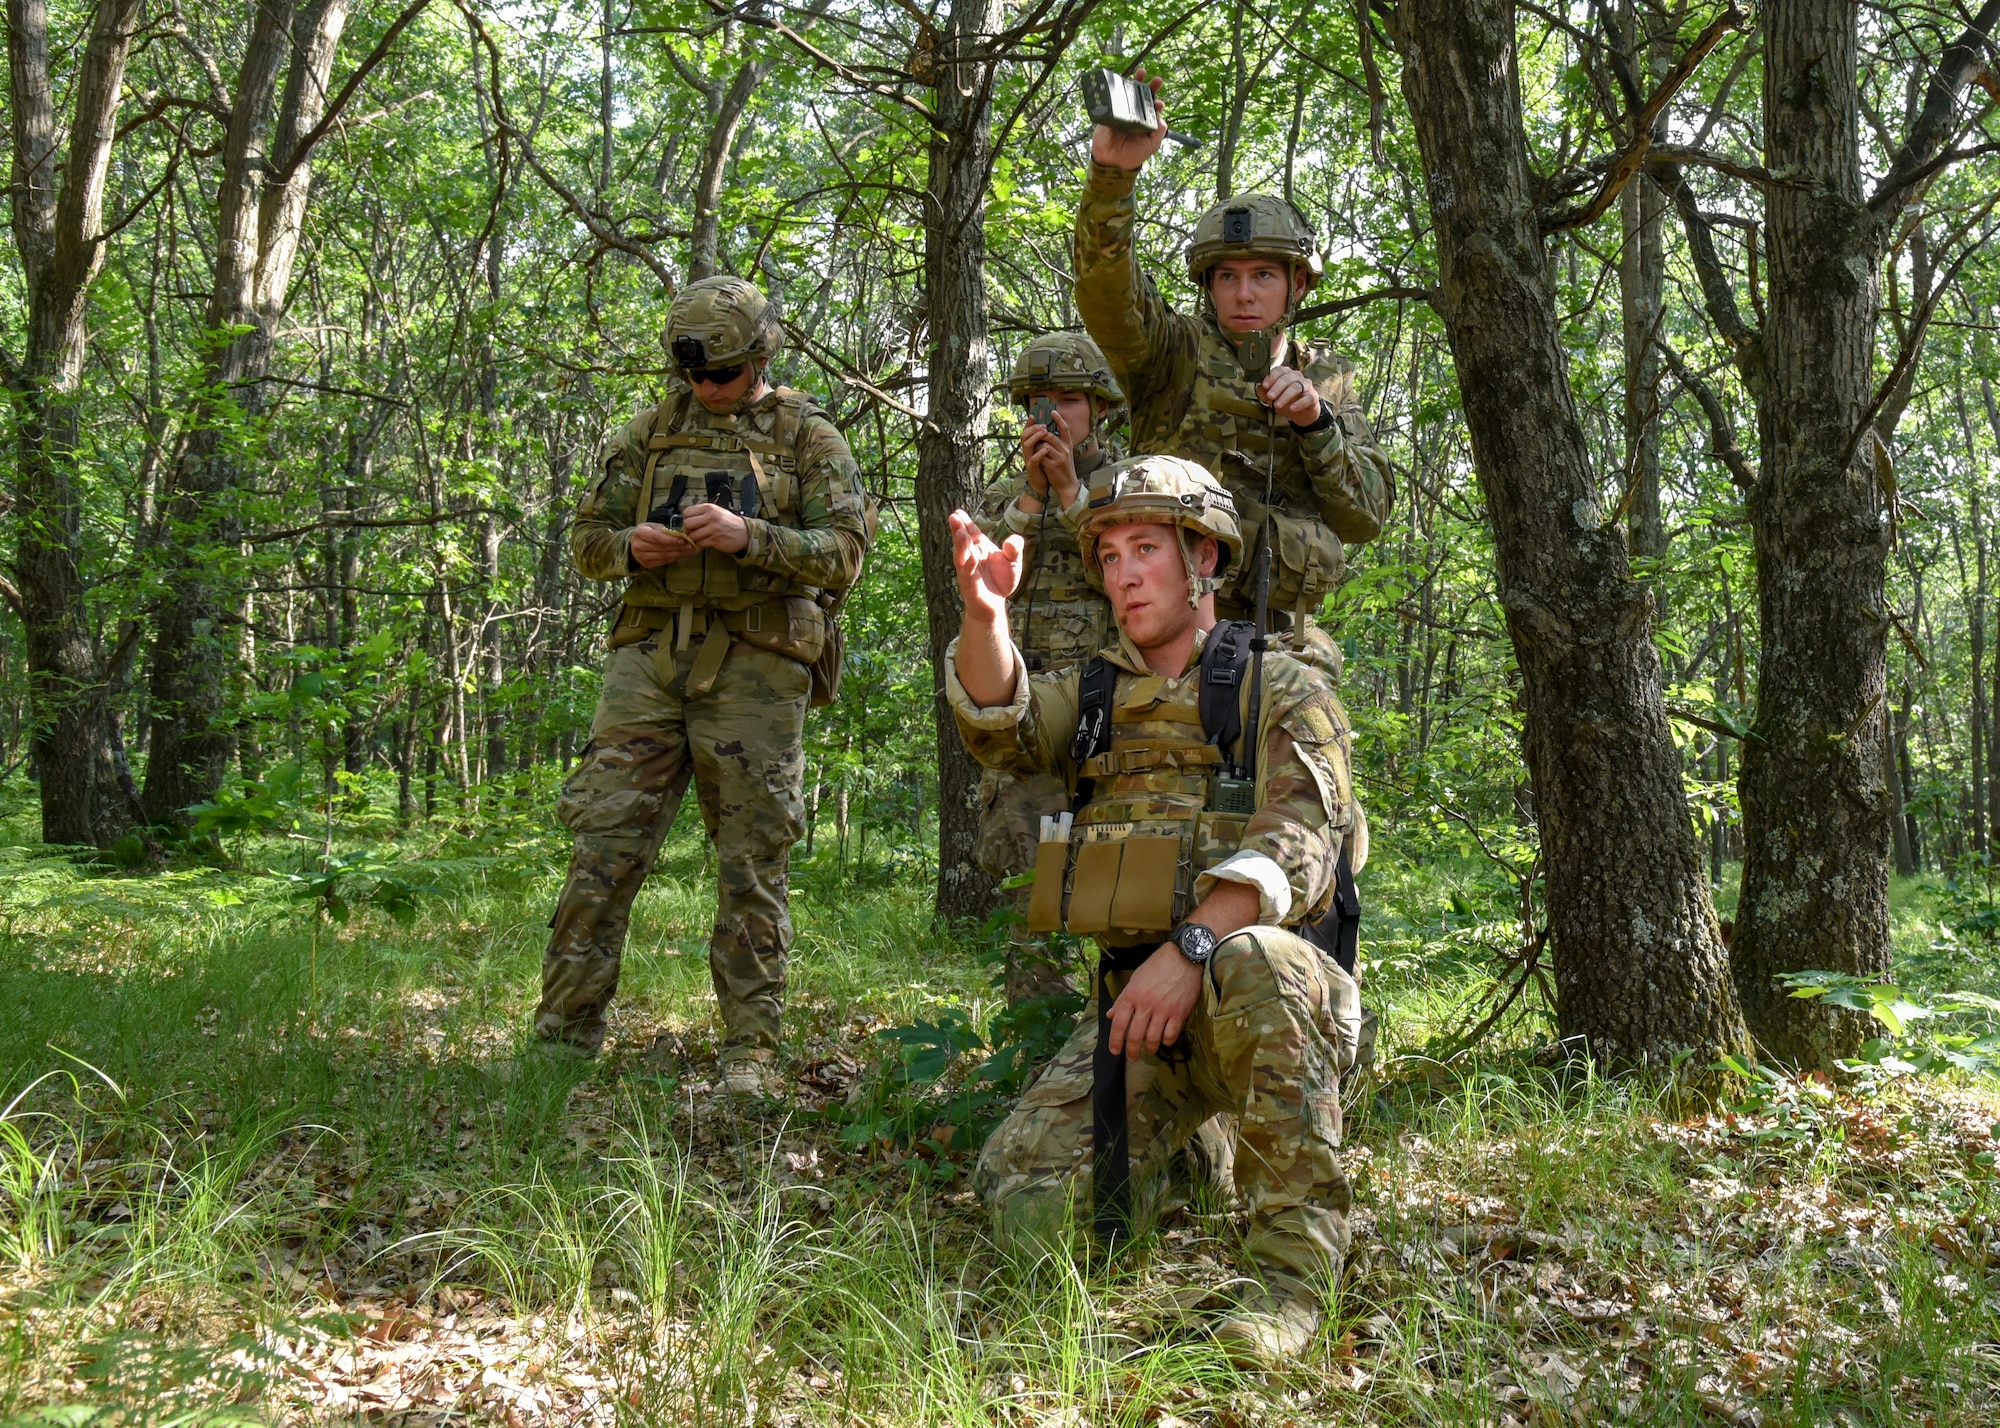 A team of Explosive Ordnance Disposal technicians work their way through a land navigation course June 25, 2018, at Fort McCoy, Wisconsin. The course allowed Airmen to practice their skills in map reading, compass use, and pace counting.
(U.S. Air National Guard photo by Airman Cameron Lewis)